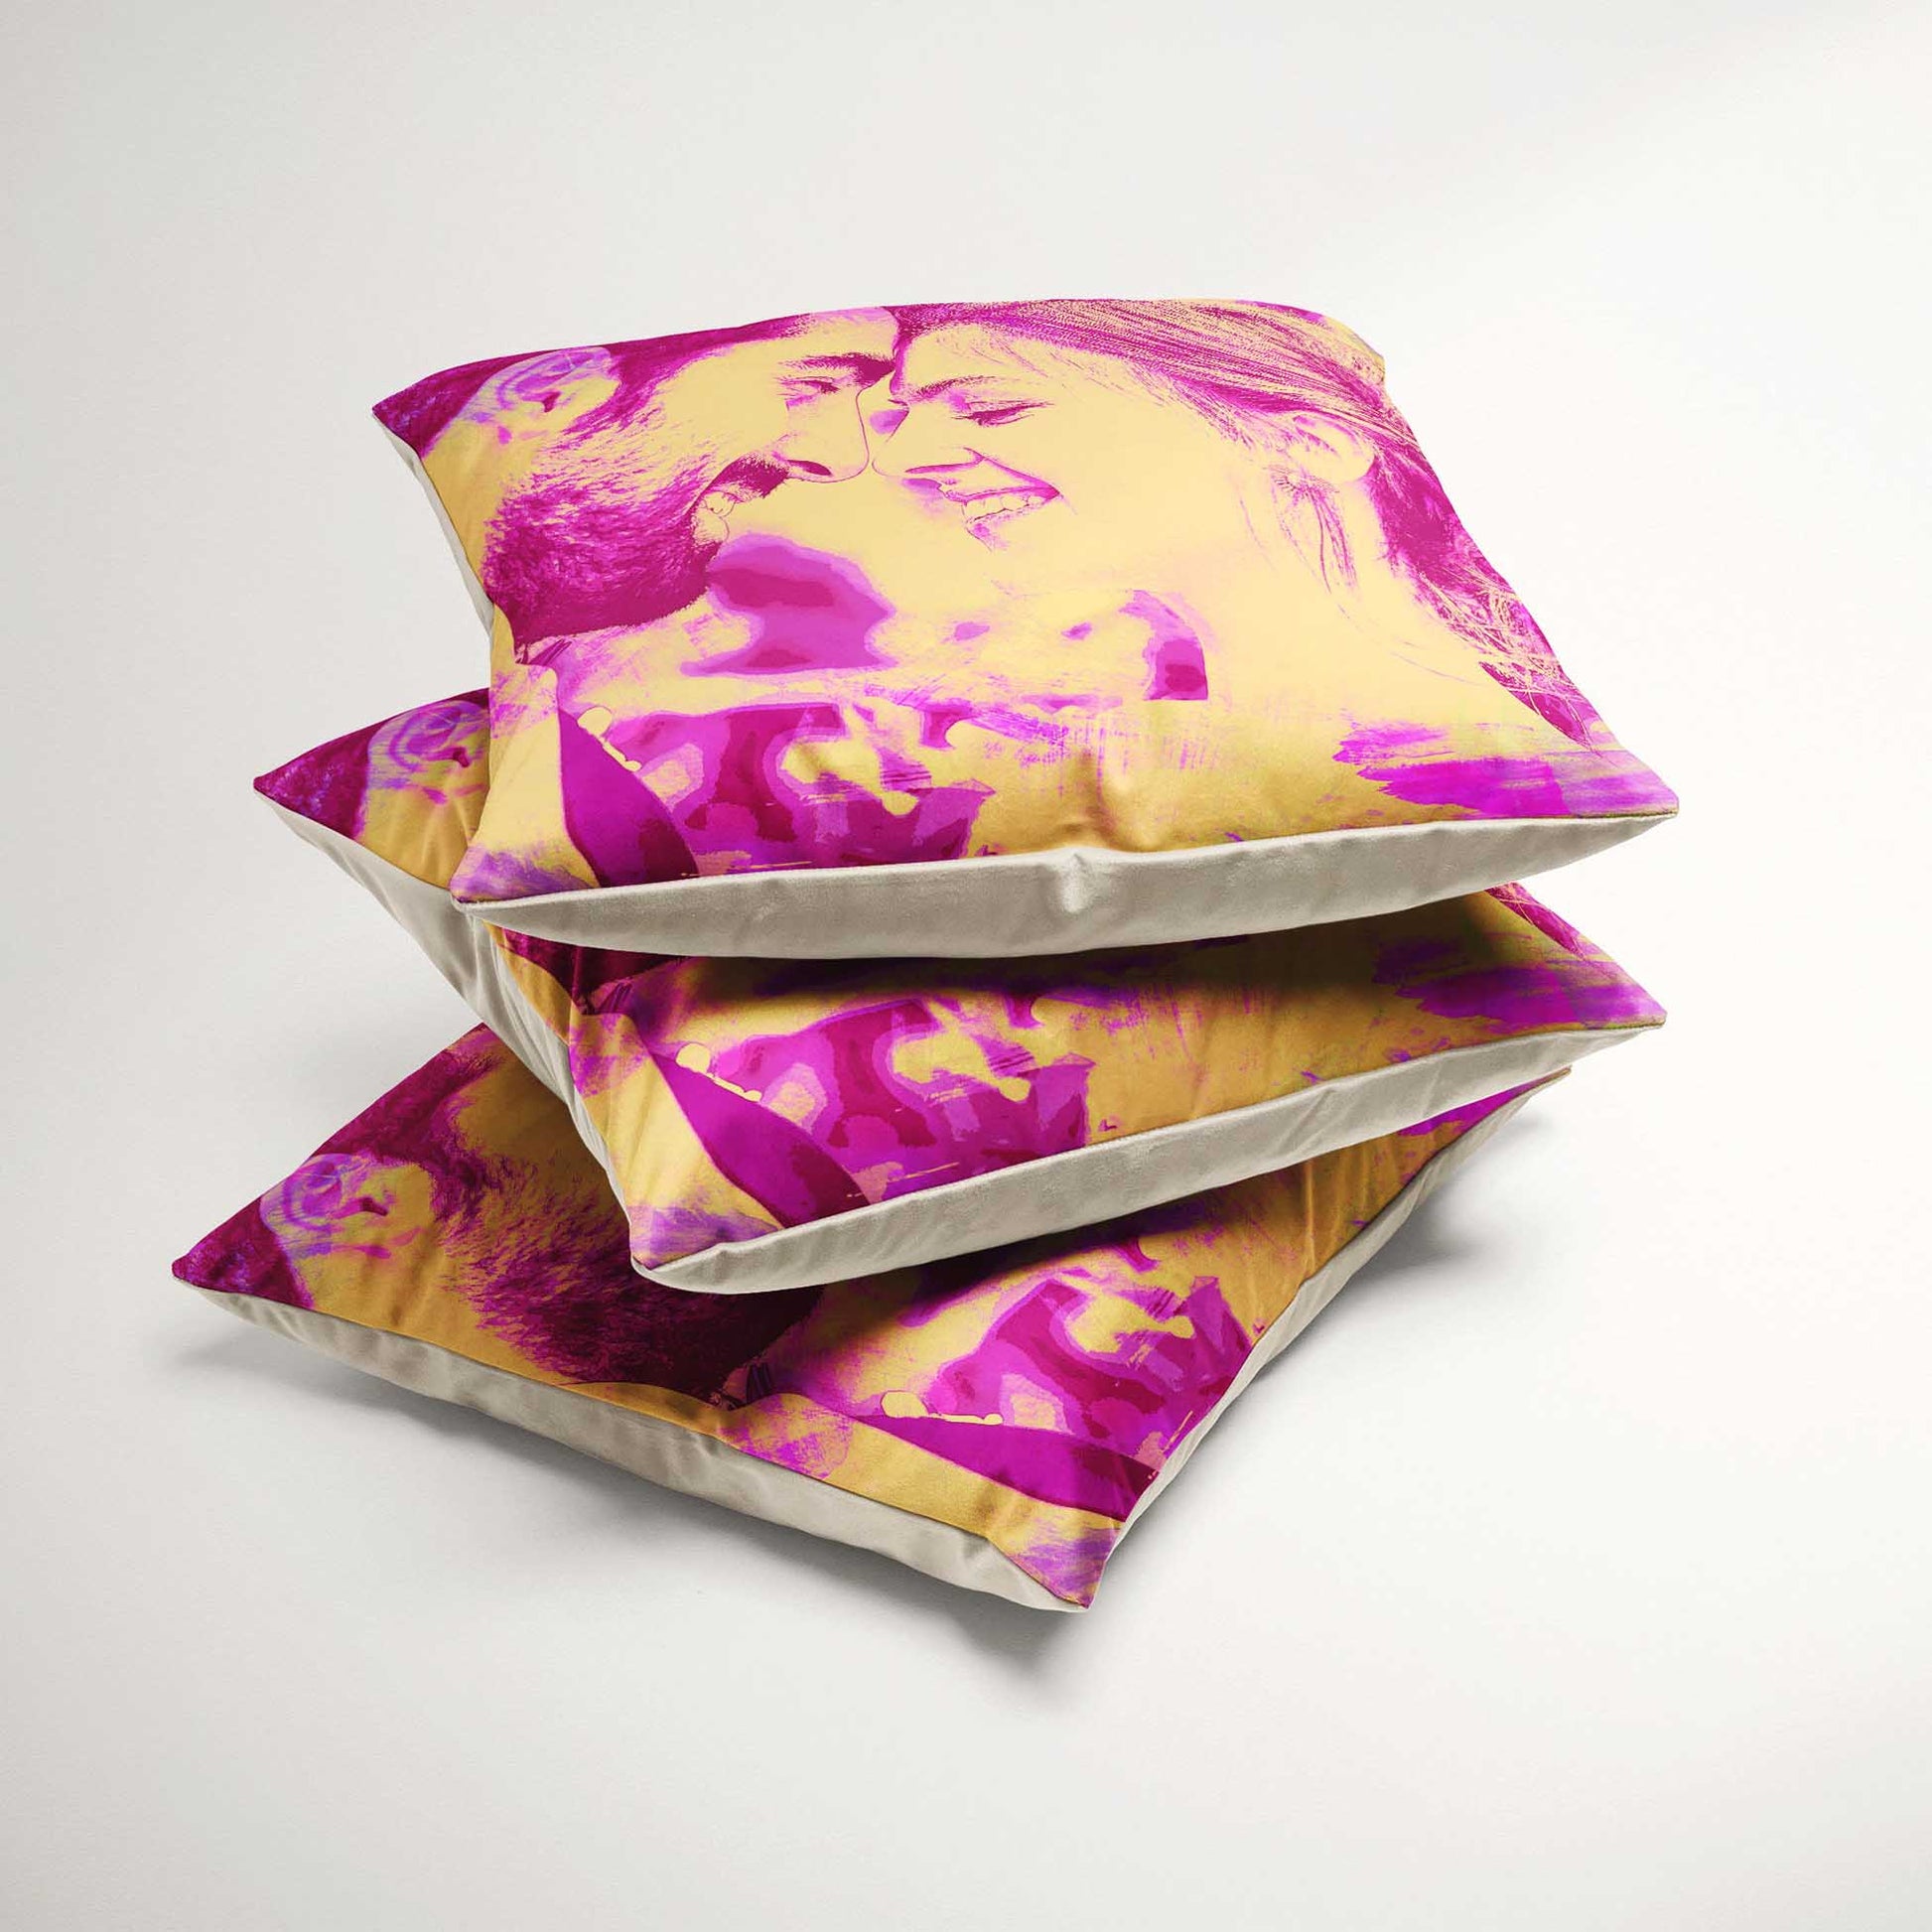 The Personalised Pink and Yellow Watercolour Cushion is a stunning piece of fine art for your home. Handmade with soft velvet, it features unique brush strokes that create a mesmerizing visual effect